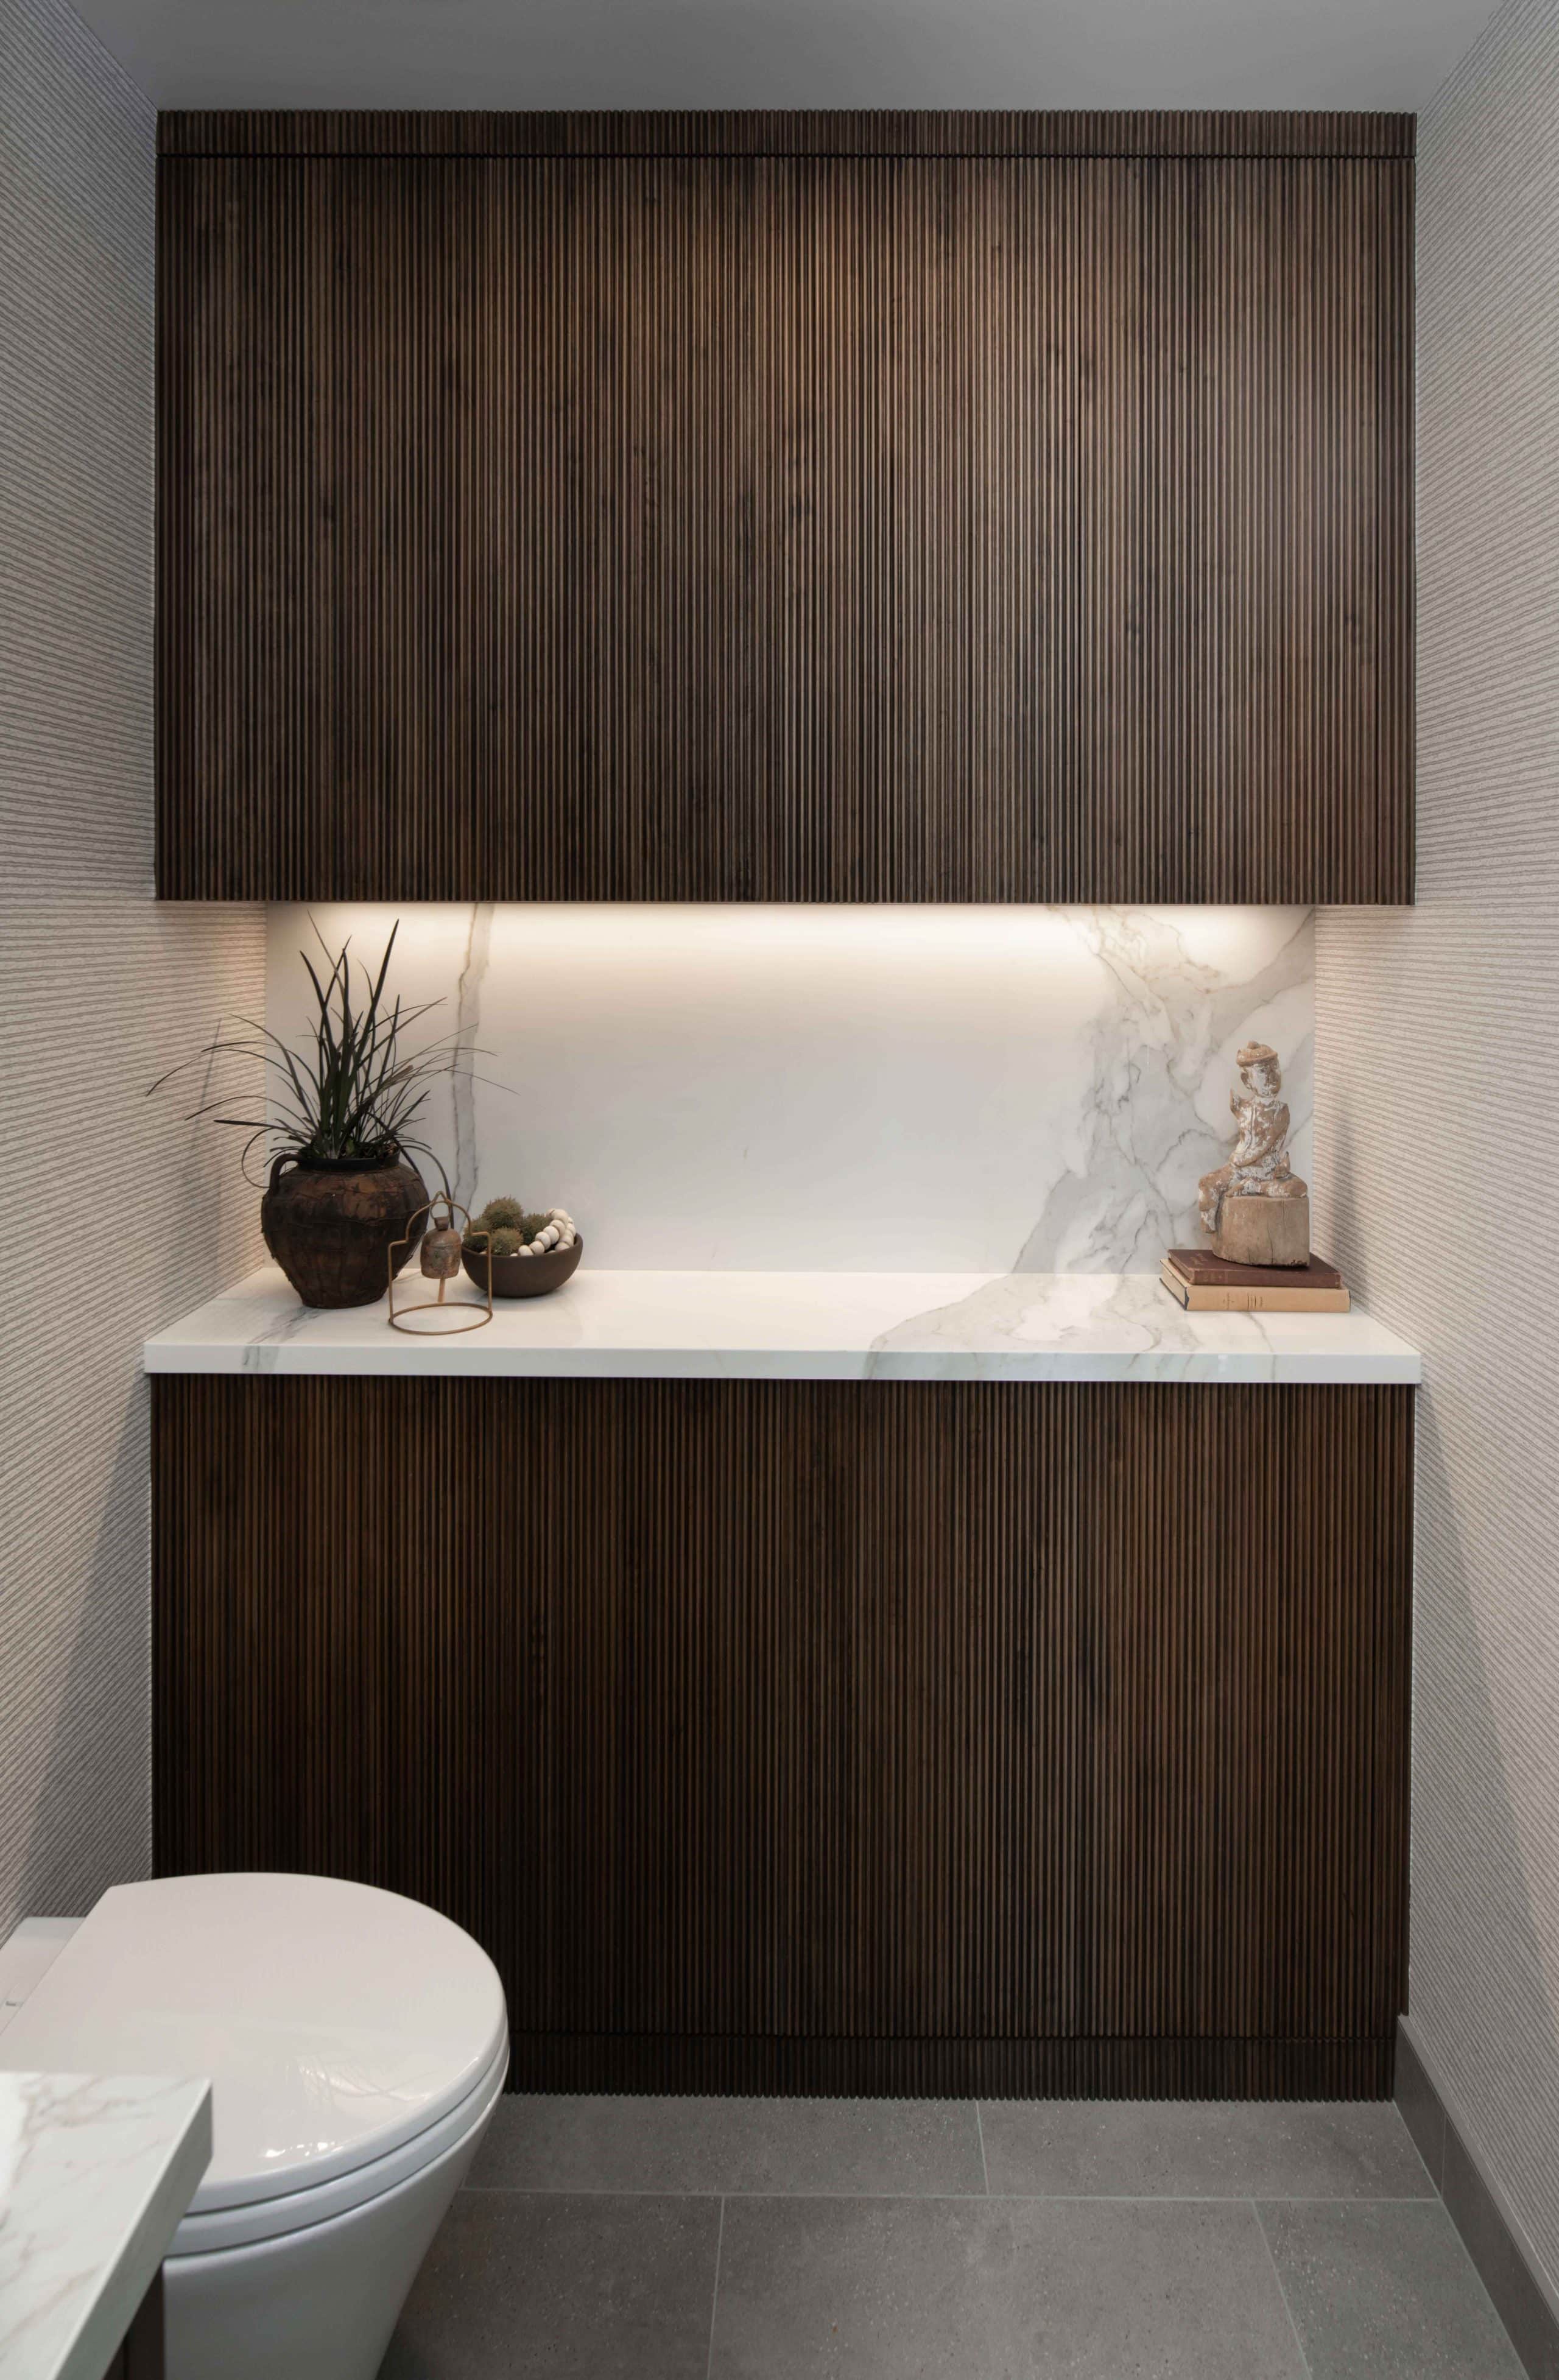 maple bathroom cabinets with undercabinet lighting